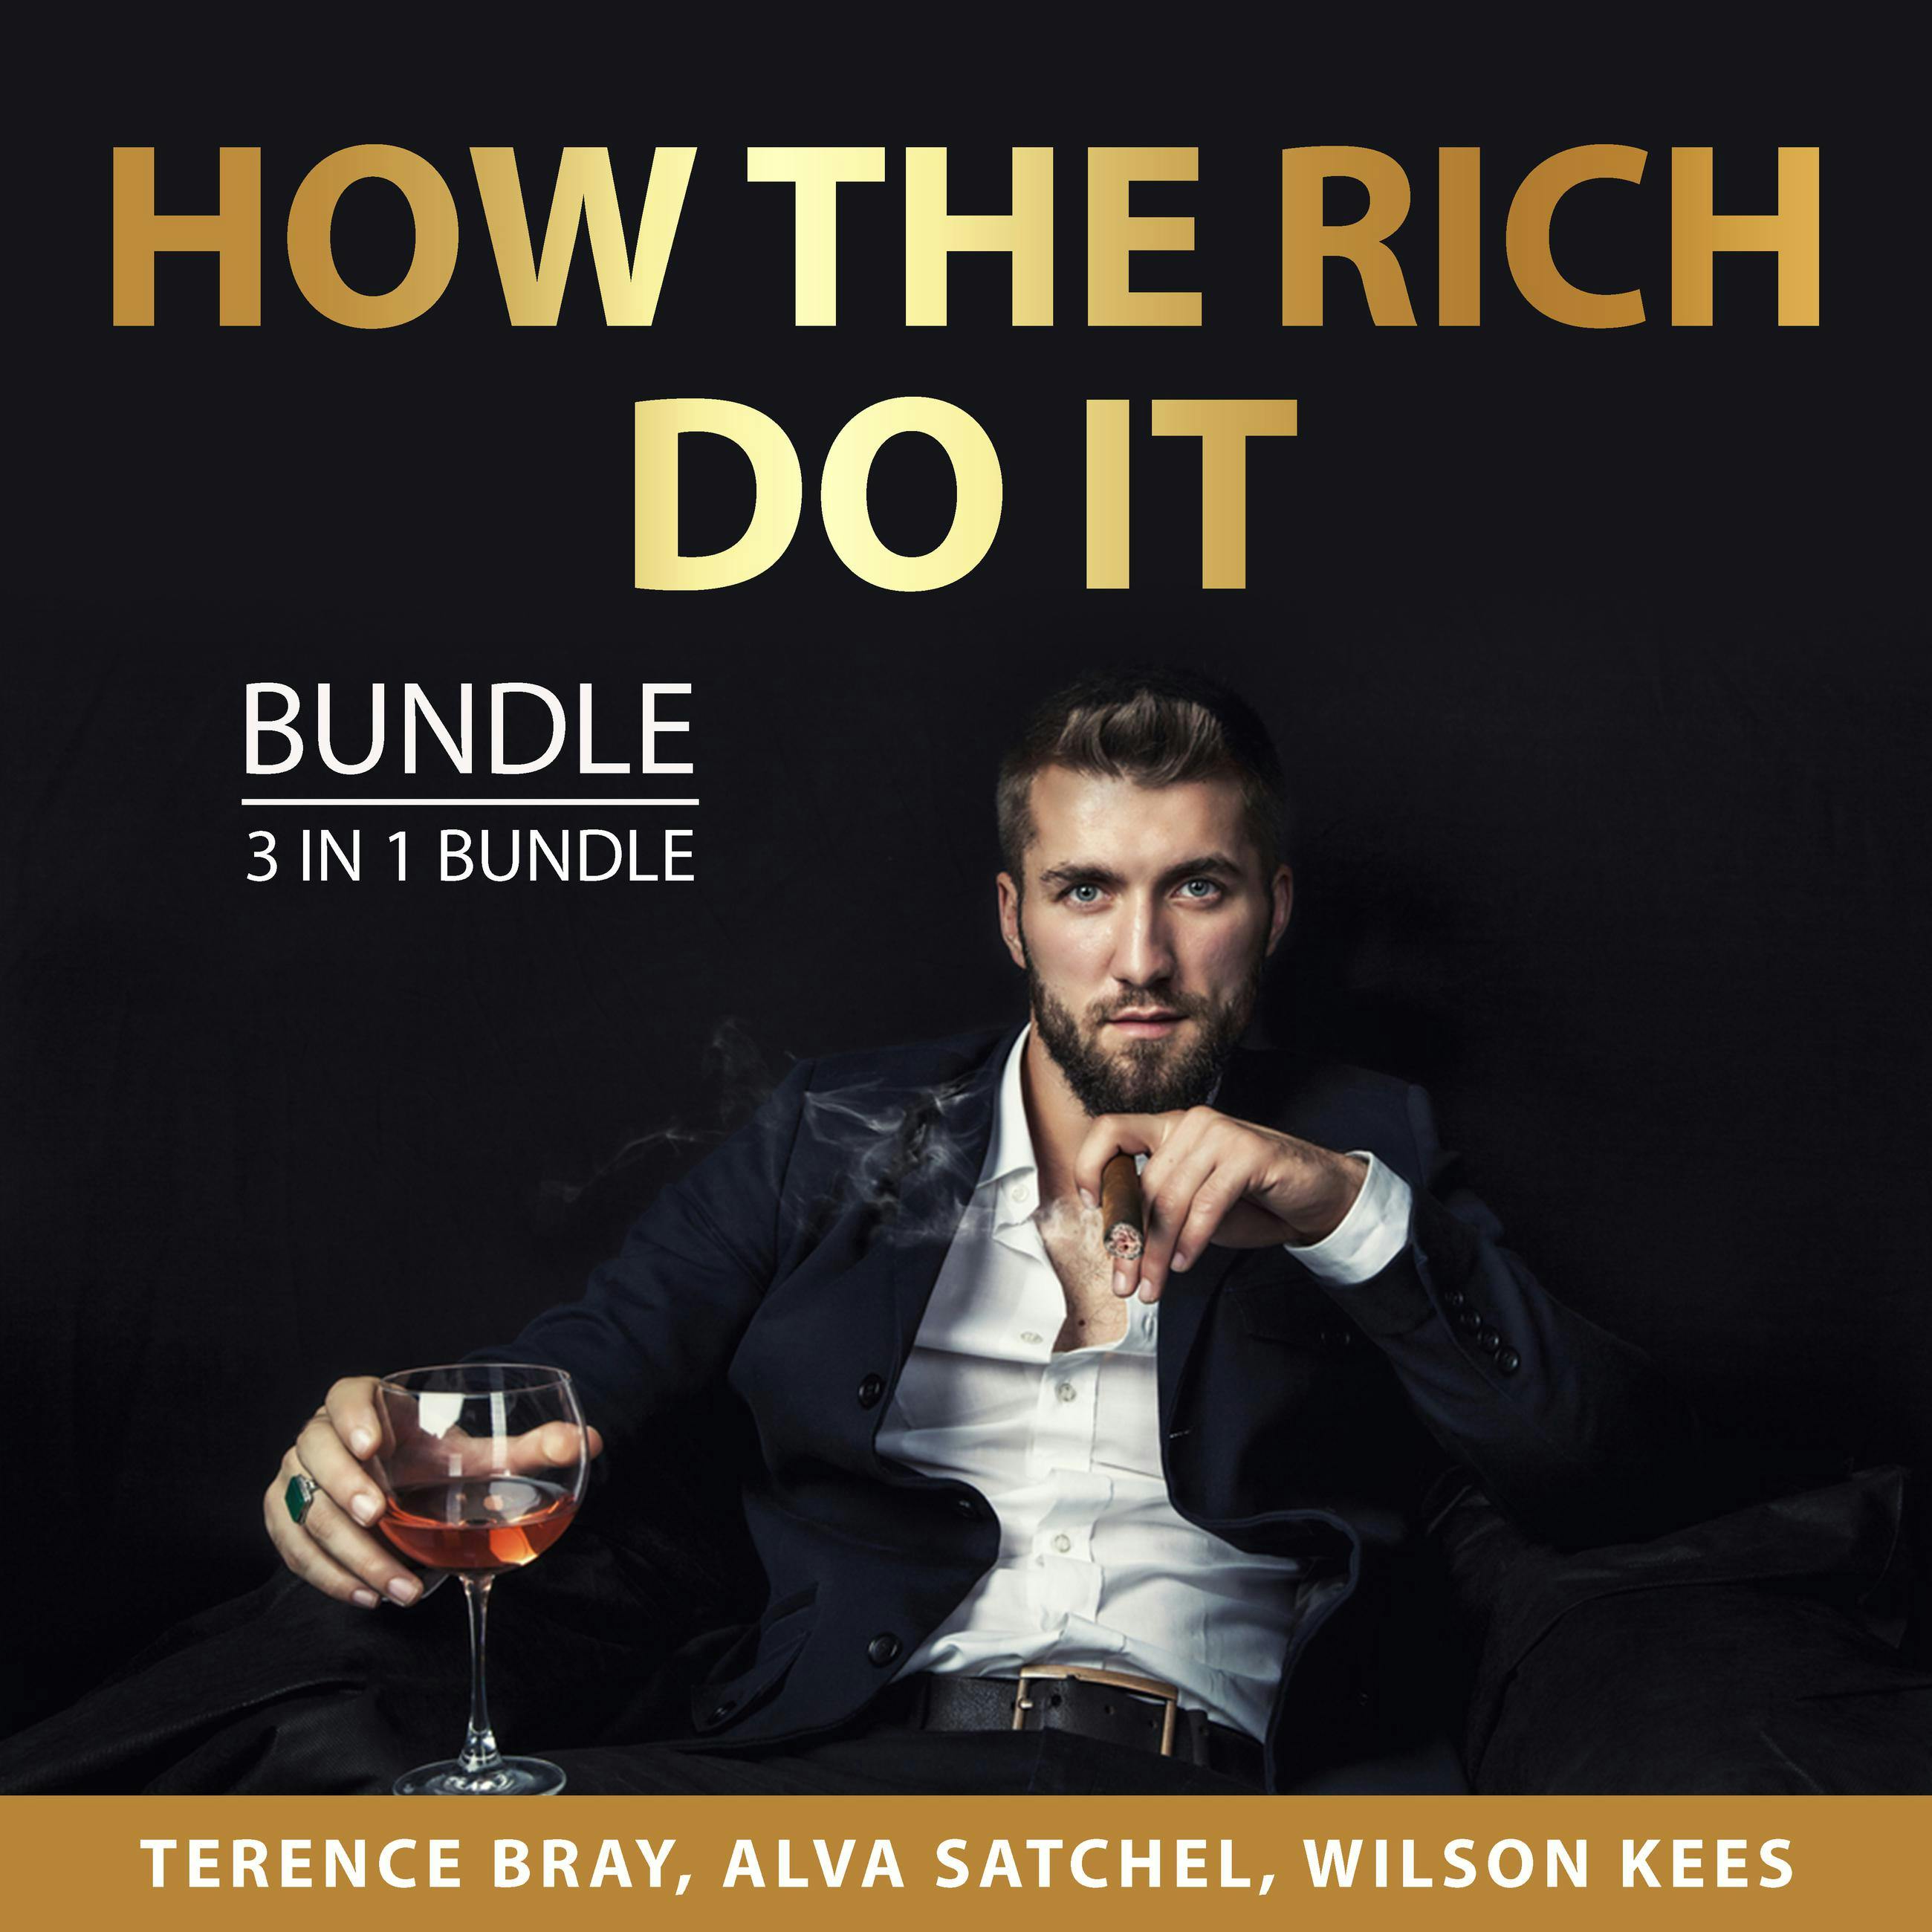 How the Rich Do It Bundle, 3 in 1 Bundle: How Millionaires Do It,  Secrets of the Rich and Wealthy, and Better Lifestyle for Success - Terence Bray, Alva Satchel, Wilson Kees